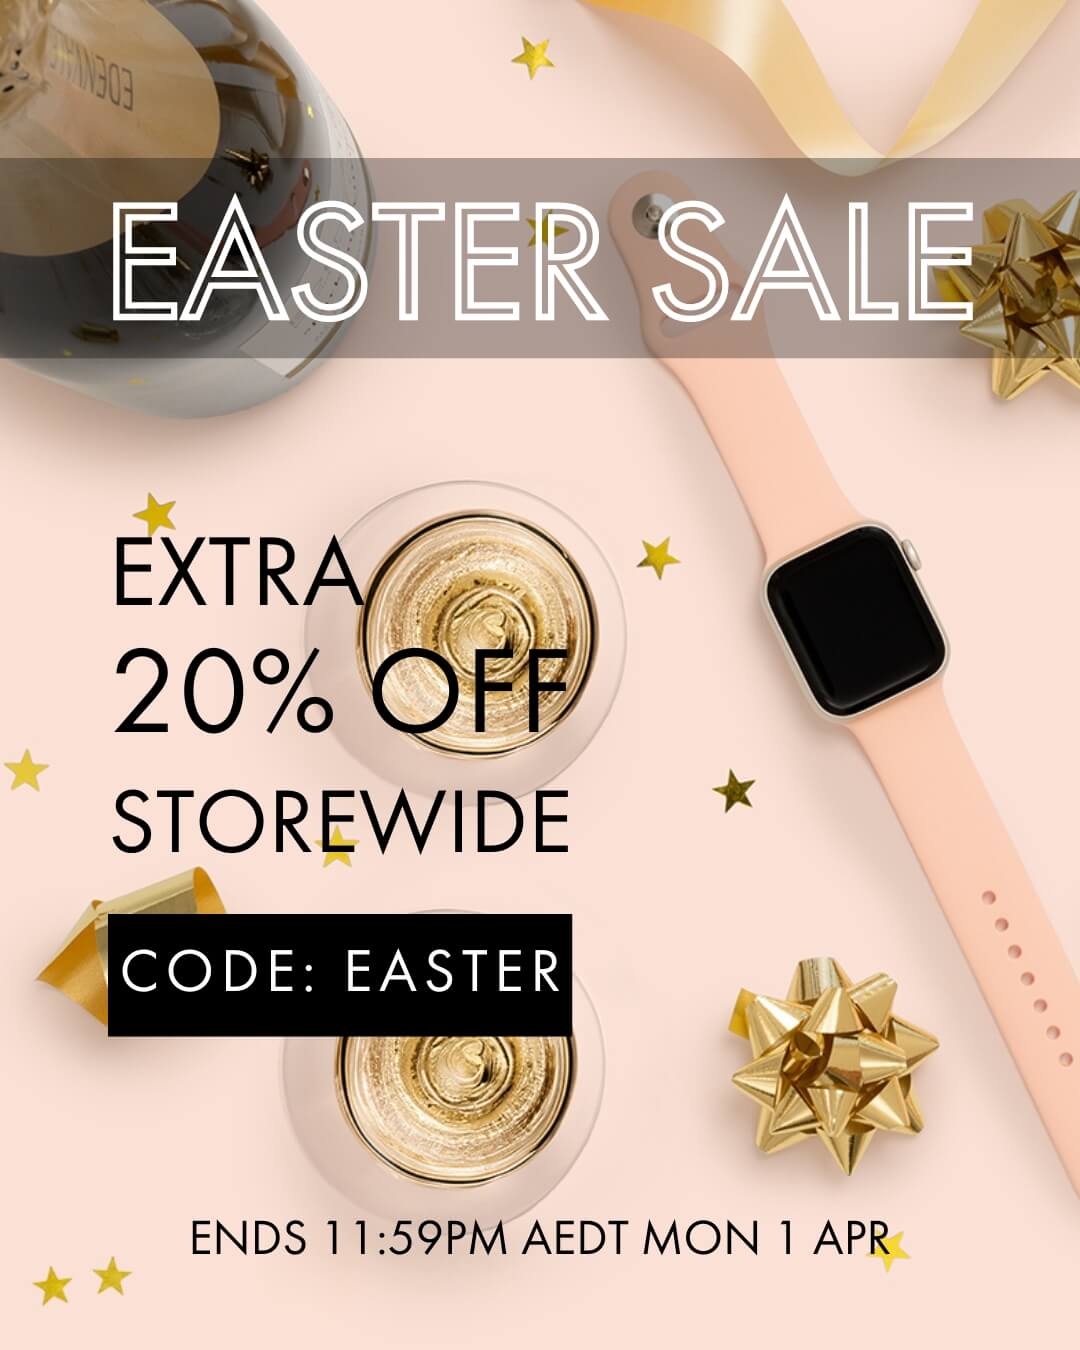 Easter Sale 20% Off Storewide